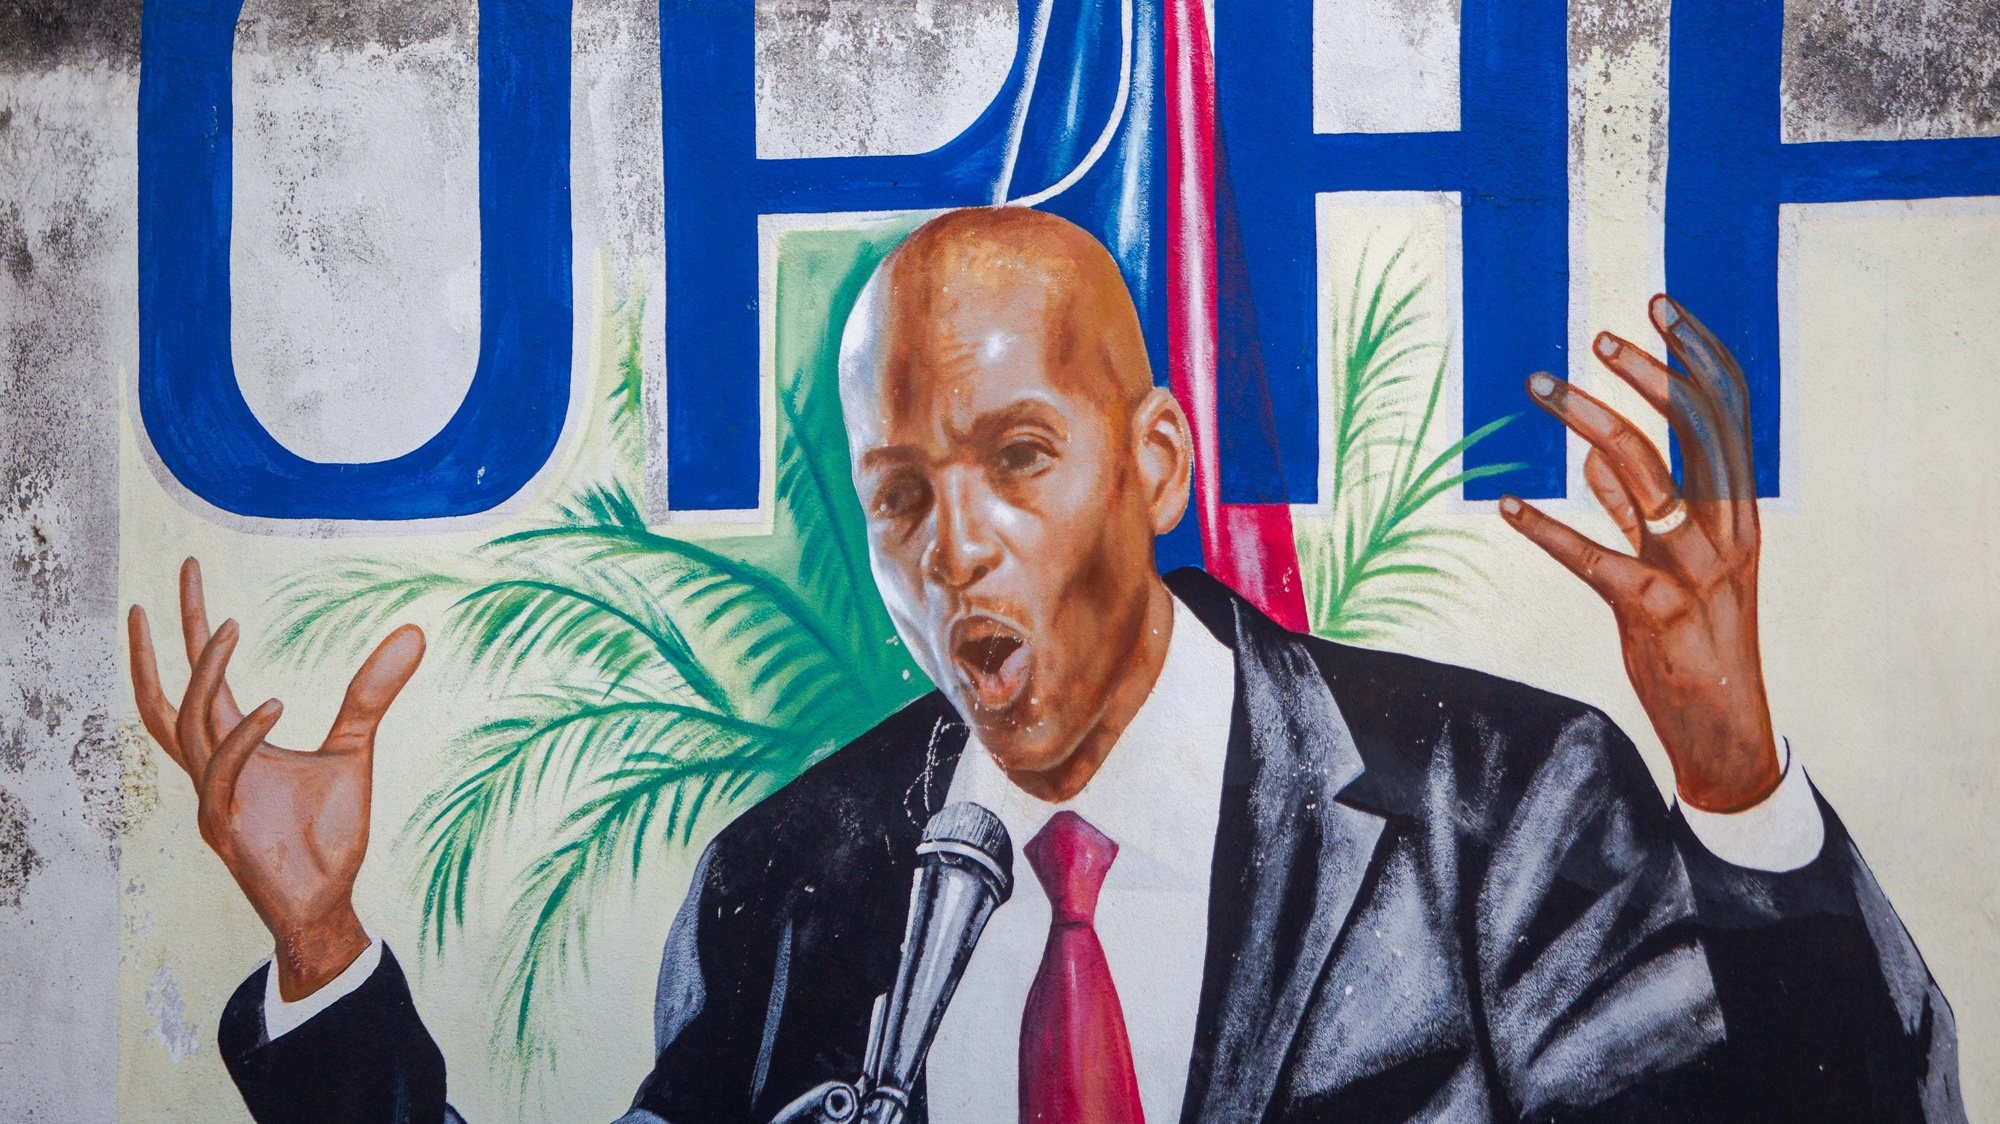 epa09329349 View of a mural of the assassinated President Jovenel Moise in Port-au-Prince, Haiti, 07 July 2021. The President of Haiti Jovenel Moise, was assassinated on 07 July by armed men who carried out an attack on his residence in the early morning in the Pelerin neighborhood of Port-au-Prince, said interim prime minister, Claude Joseph.  EPA/JEAN MARC HERVE ABELARD